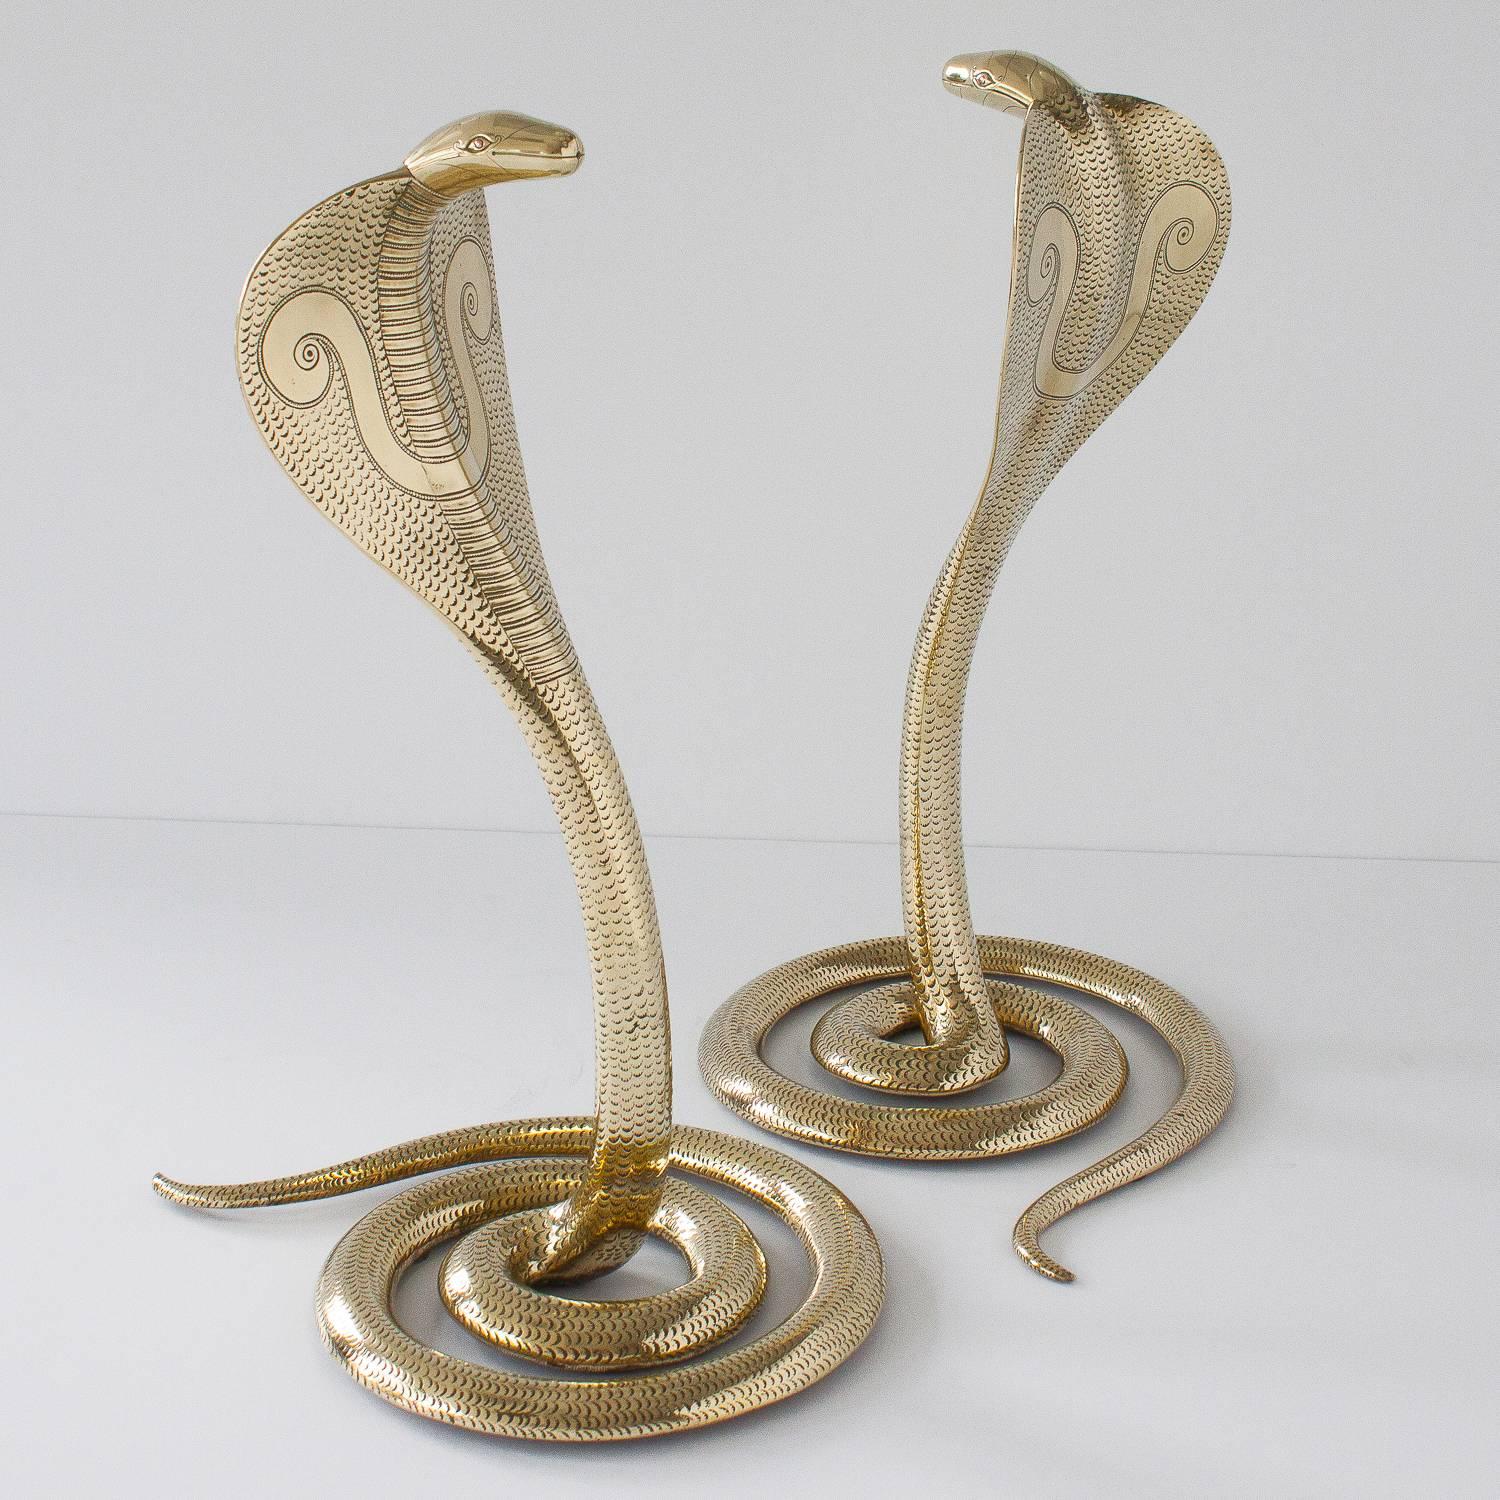 Incredible and dramatic pair of large solid brass cobra snake sculptures. Consider using as decorative andirons or table top sculptures. Handcrafted standing cobras in polished brass with carved and hammered details. Fully decorated. Opposing coiled